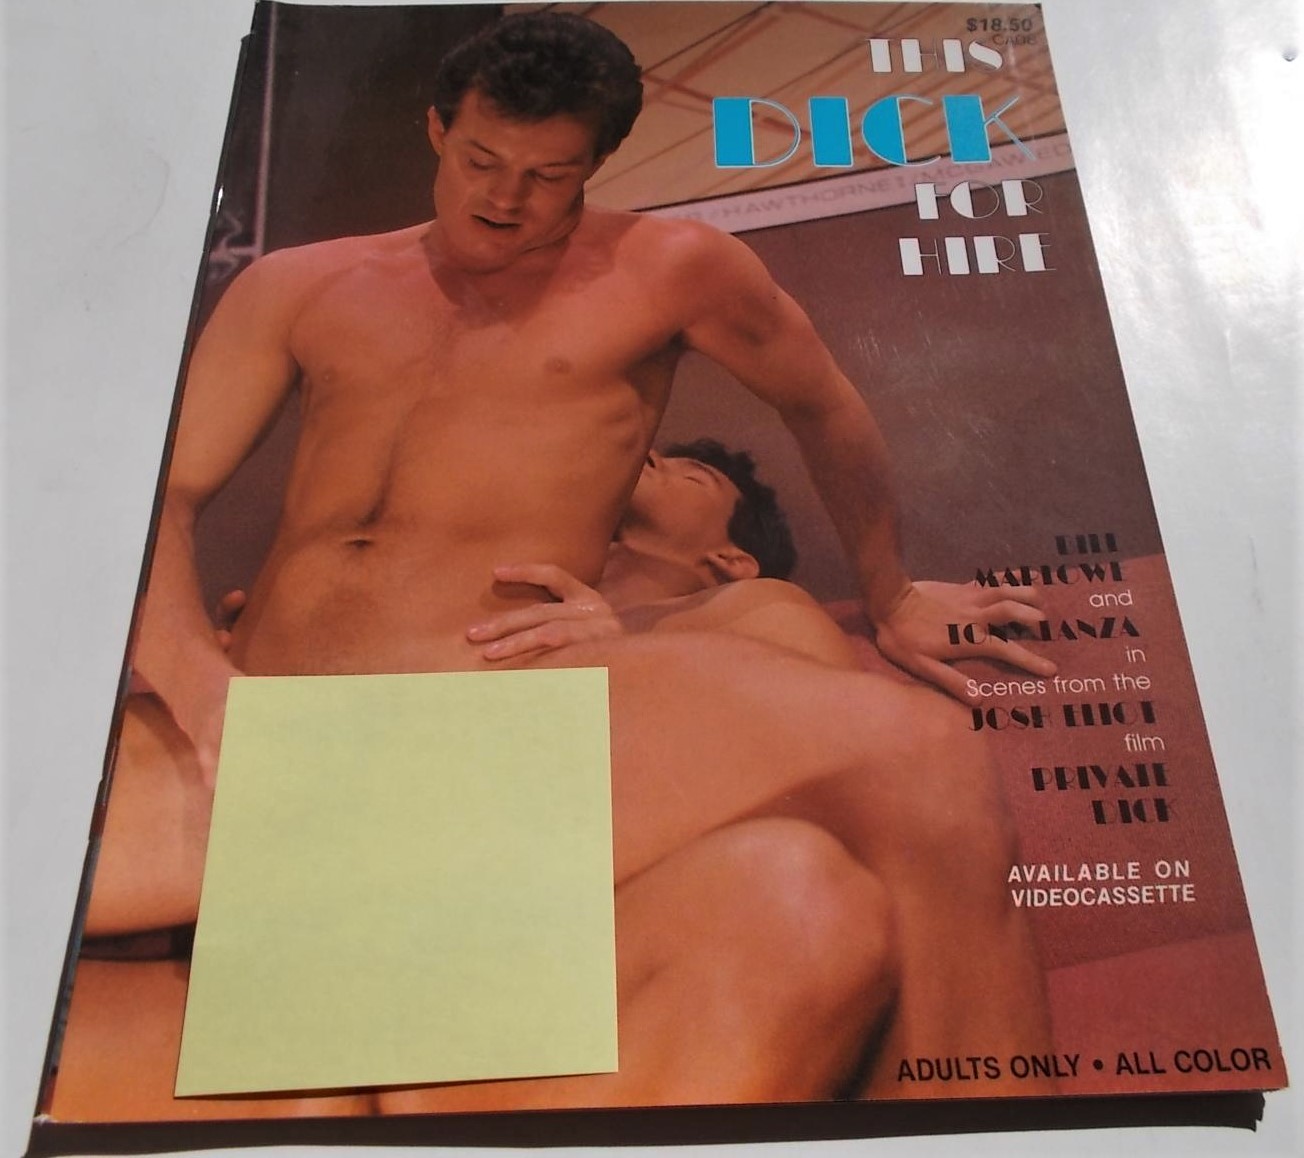 1990s Gay Porn Art - Catalina Video Presents THIS DICK FOR HIRE Featuring Scenes From the Josh  Eliot Film PRIVATE DICK (Gay Male Porn Adult Erotic Magazine) by Gourmet  Editions and Catalina Video: (1990) First Edition  Magazine / Periodical |